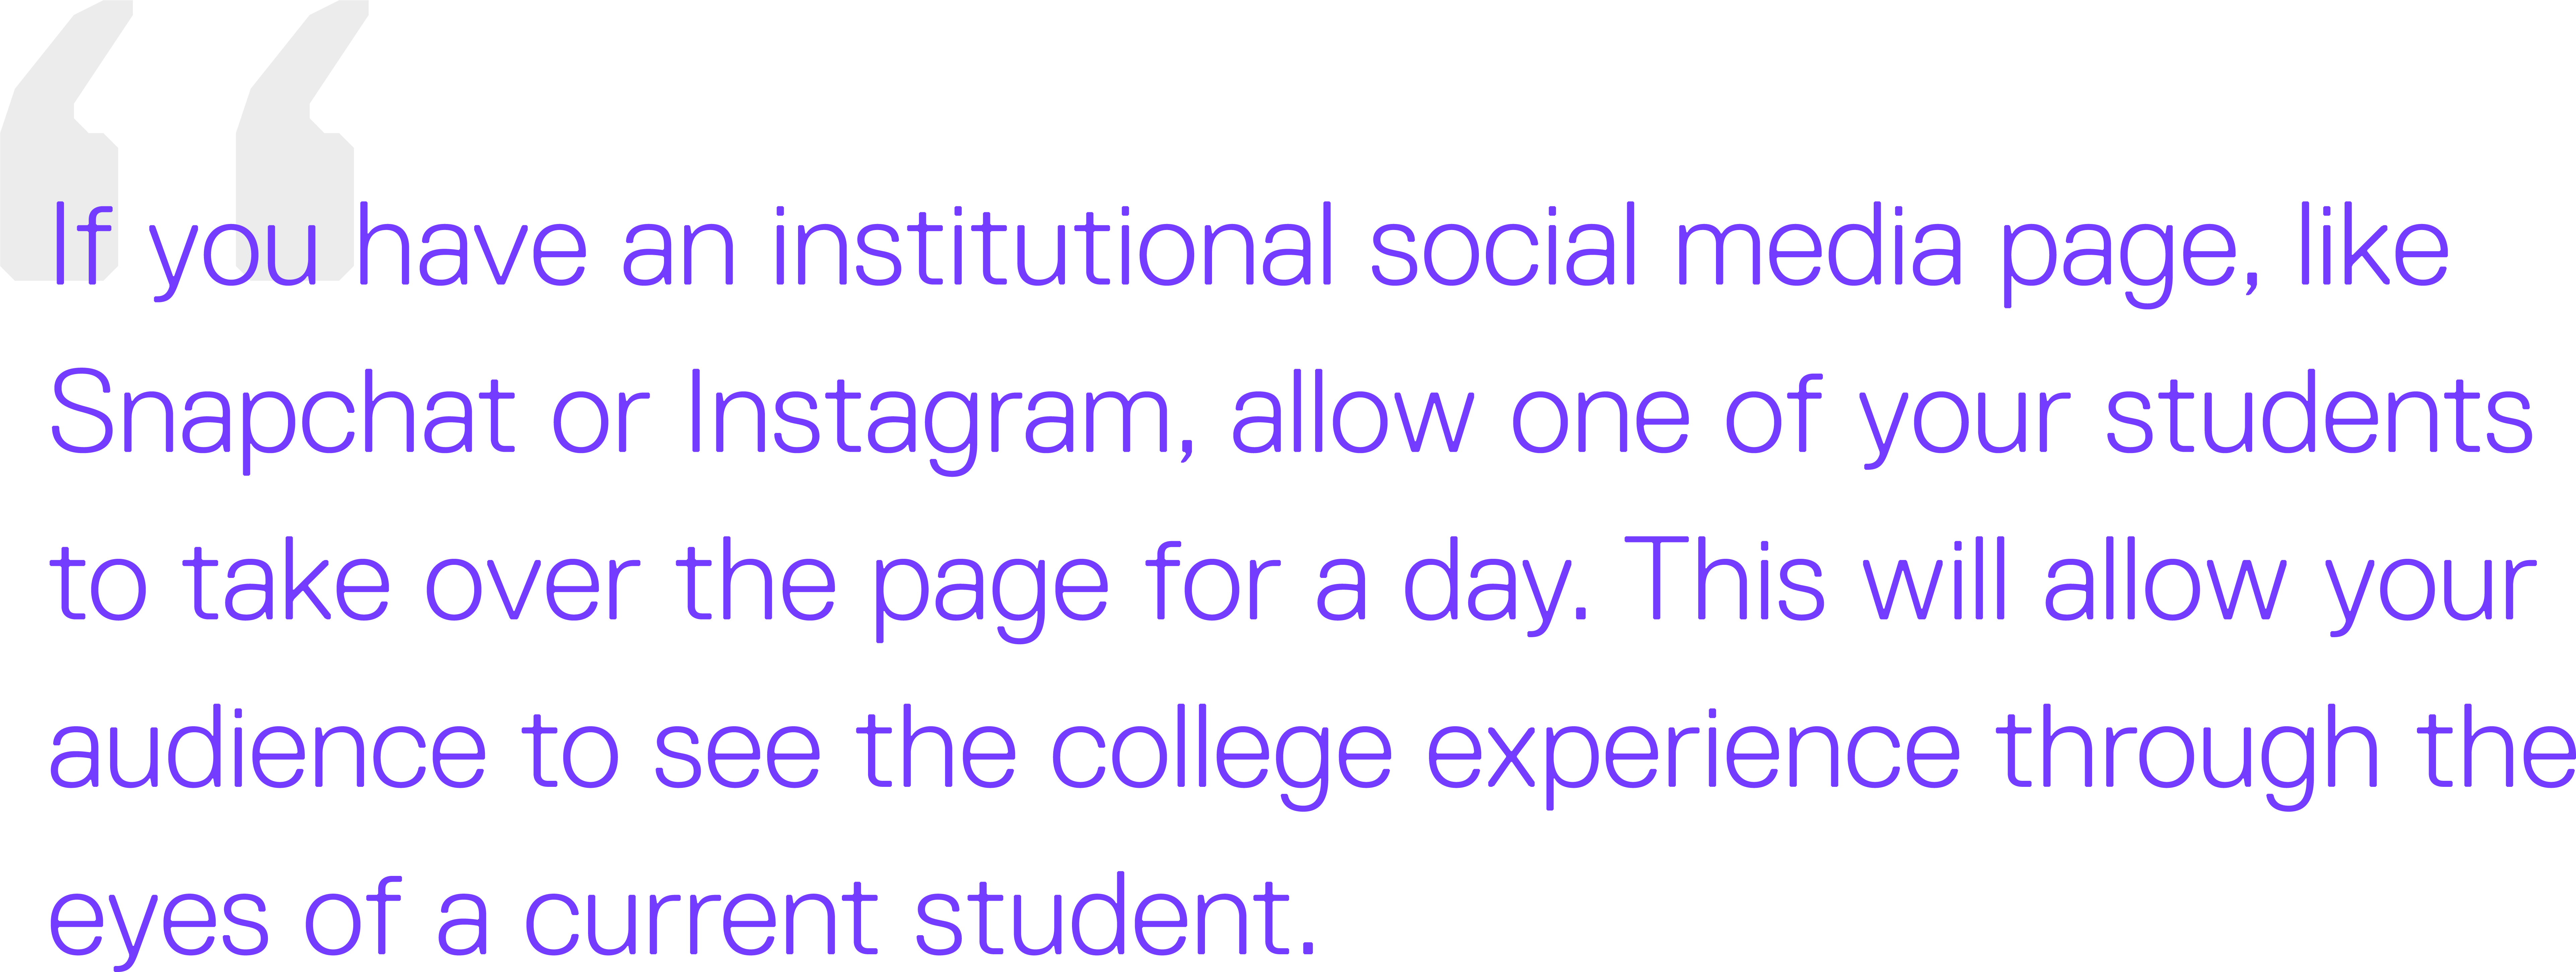 If you have an institutional social media page, like Snapchat or Instagram, allow one of your students to take over the page for a day. This will allow your audience to see the college experience through the eyes of a current student.